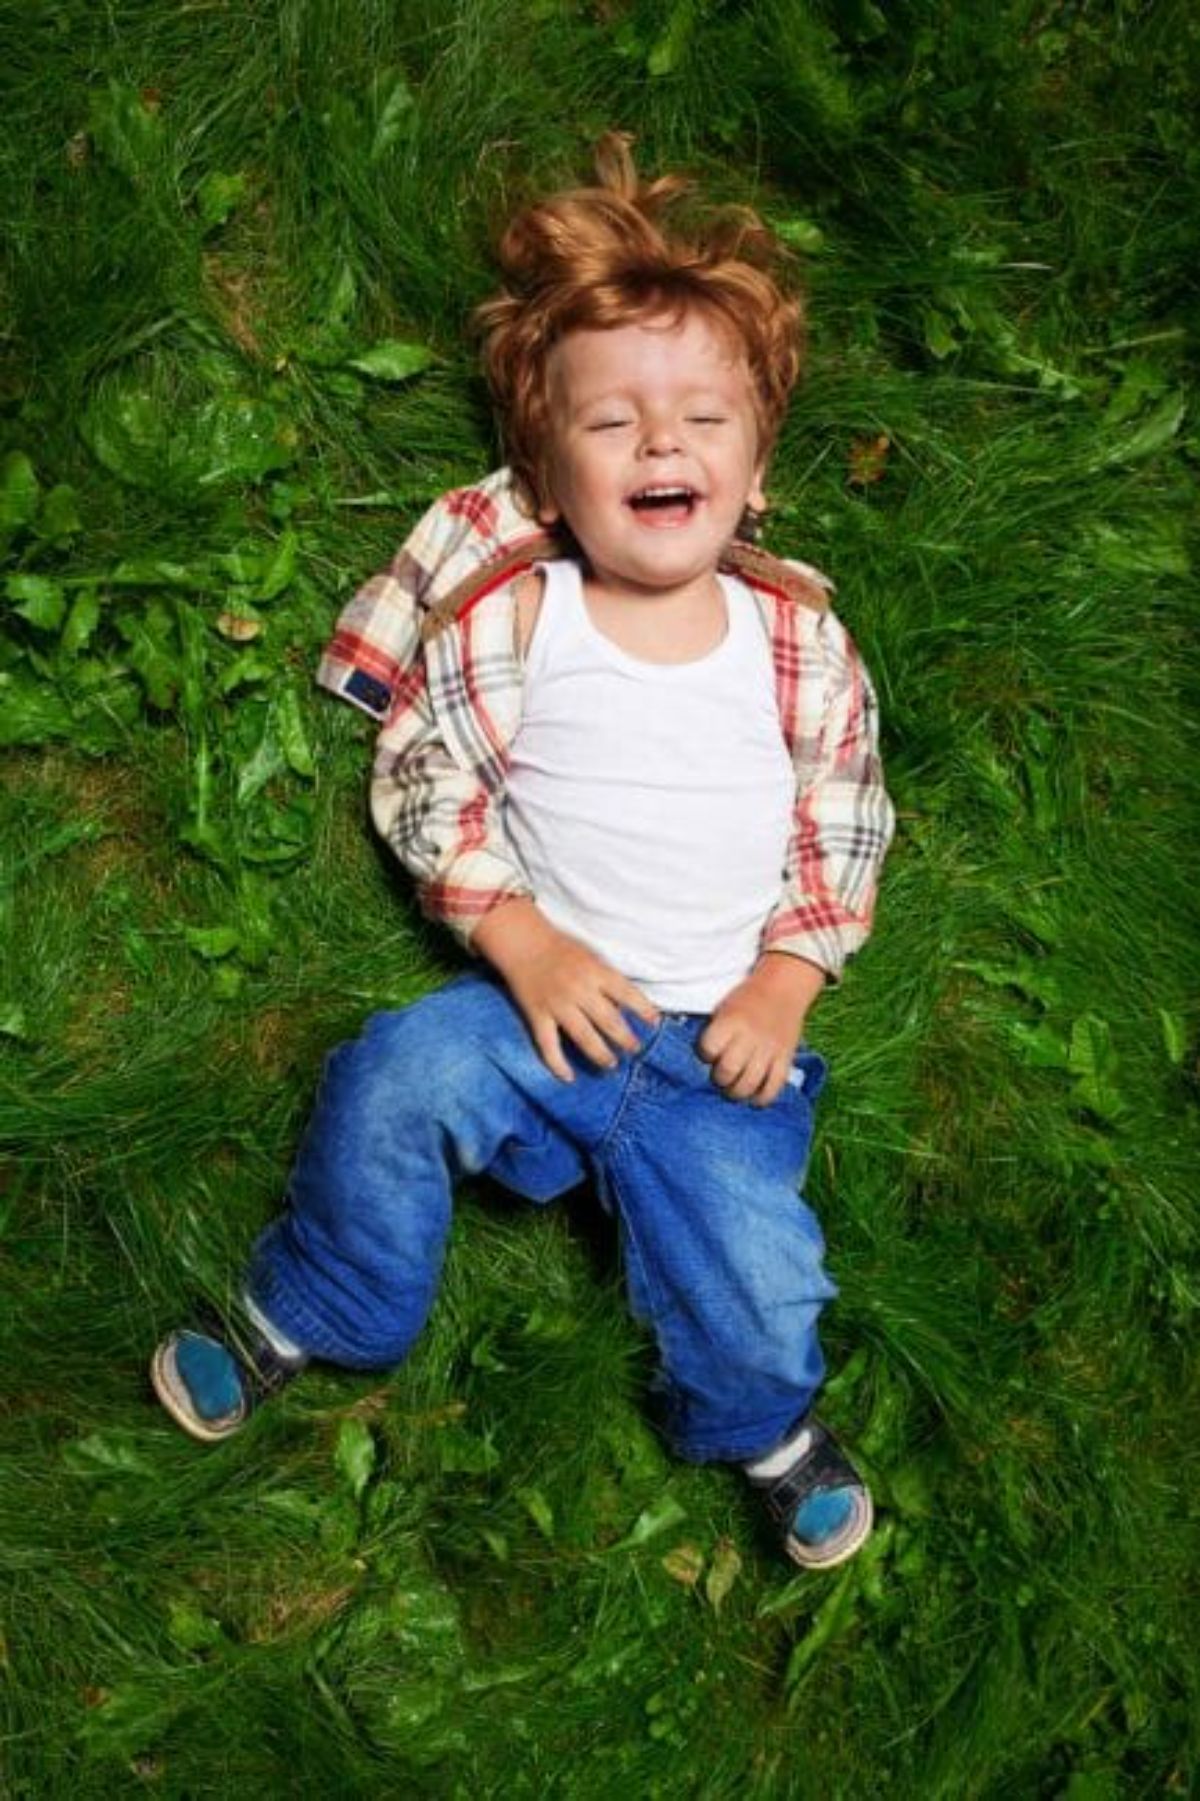 a young boy with red hair, blue jeans and a checked red and white shirt lays on some grass, looking u pat the camera and laughing